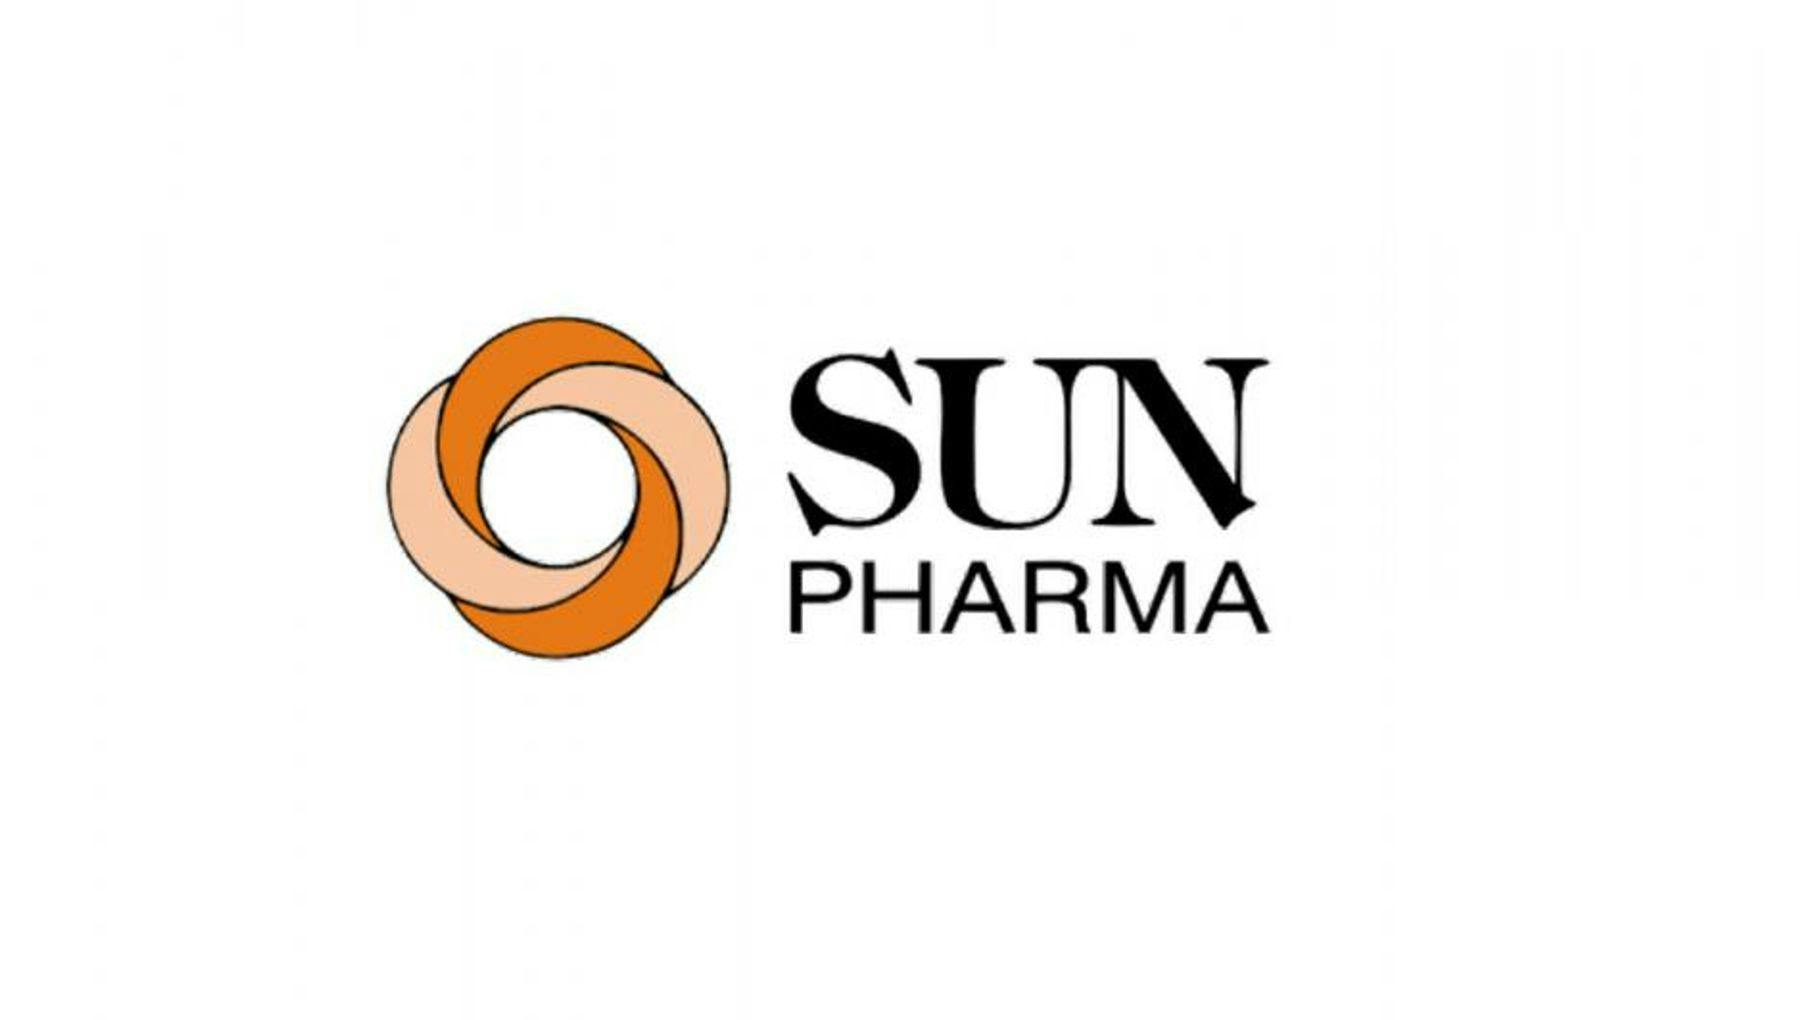 pharmaceutical company from India